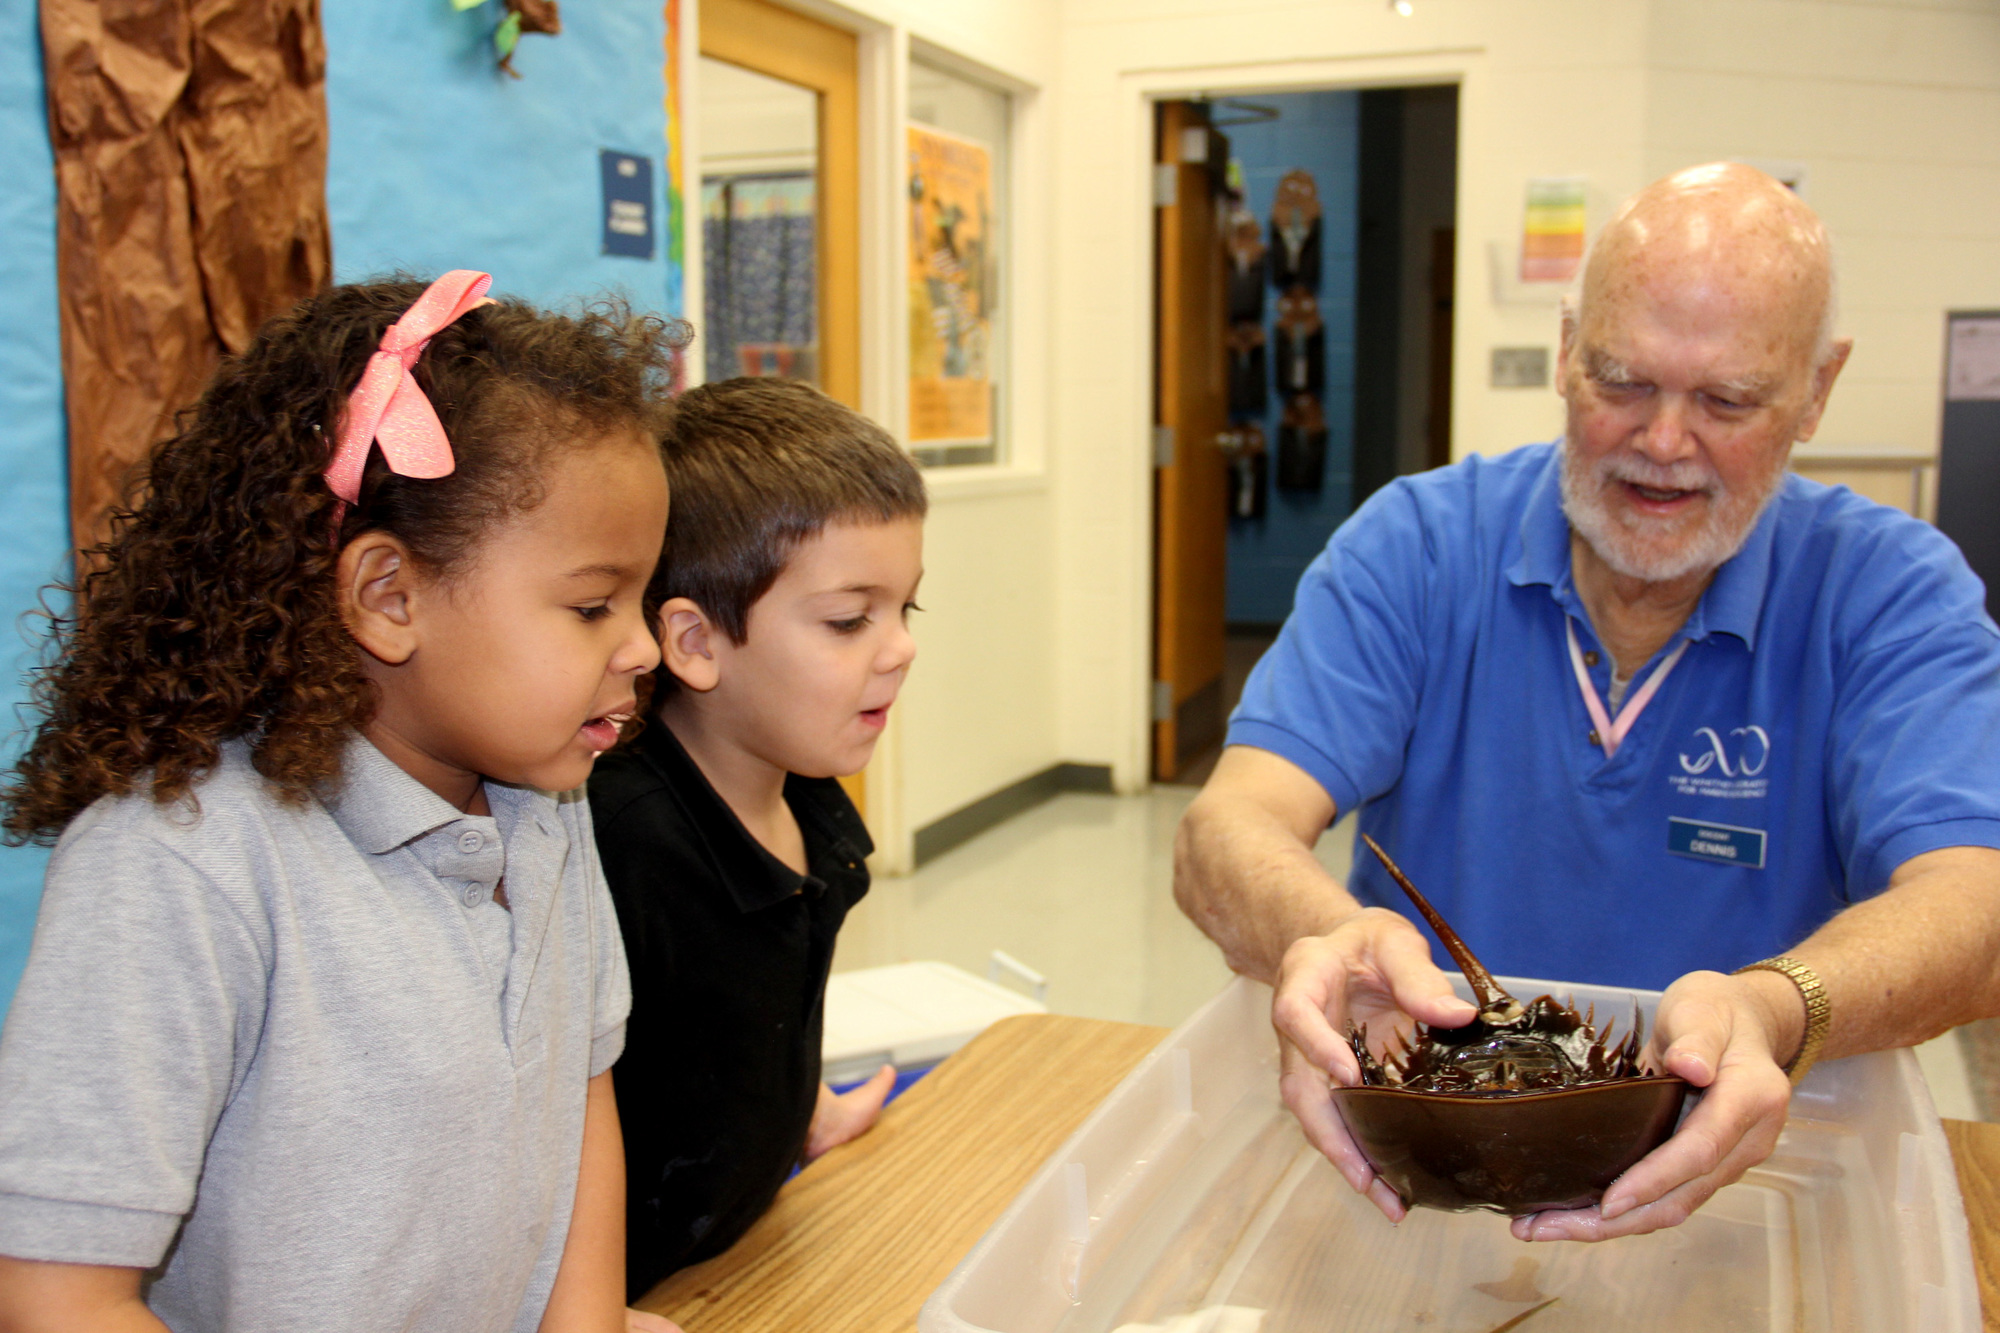 Whitney Laboratory docent Dennis Beynon lowers a horseshoe crab into a bin of water for Nala Graham and Sal Kilday. Photo Jacque Estes